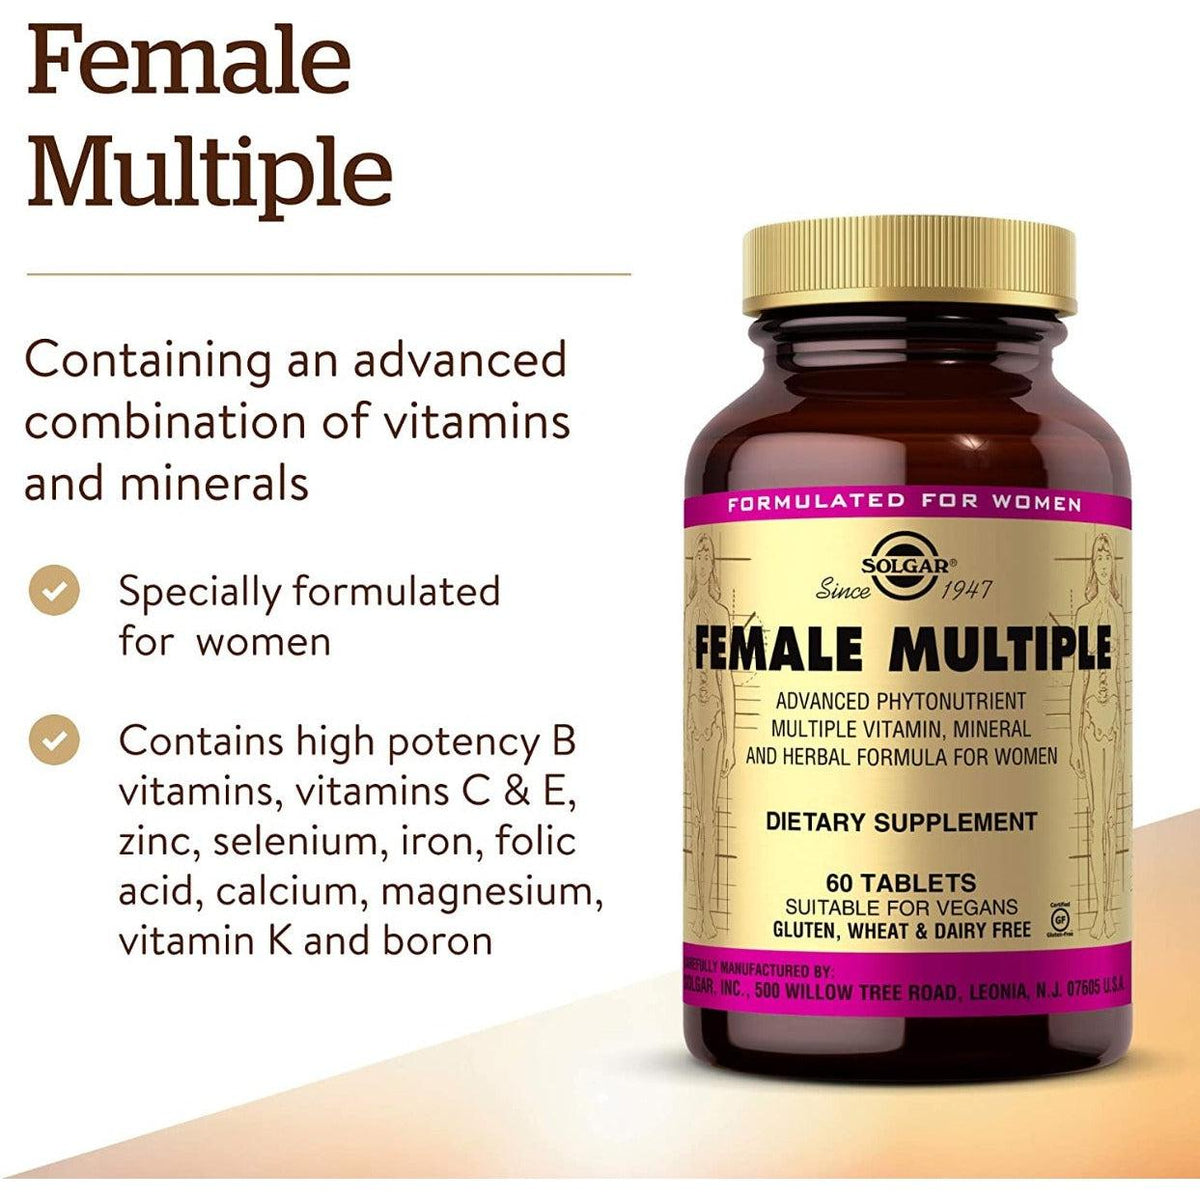 Solgar Female Multiple Advanced Multivitamin, Mineral, And Herbal Formula For Women 60 Tablets